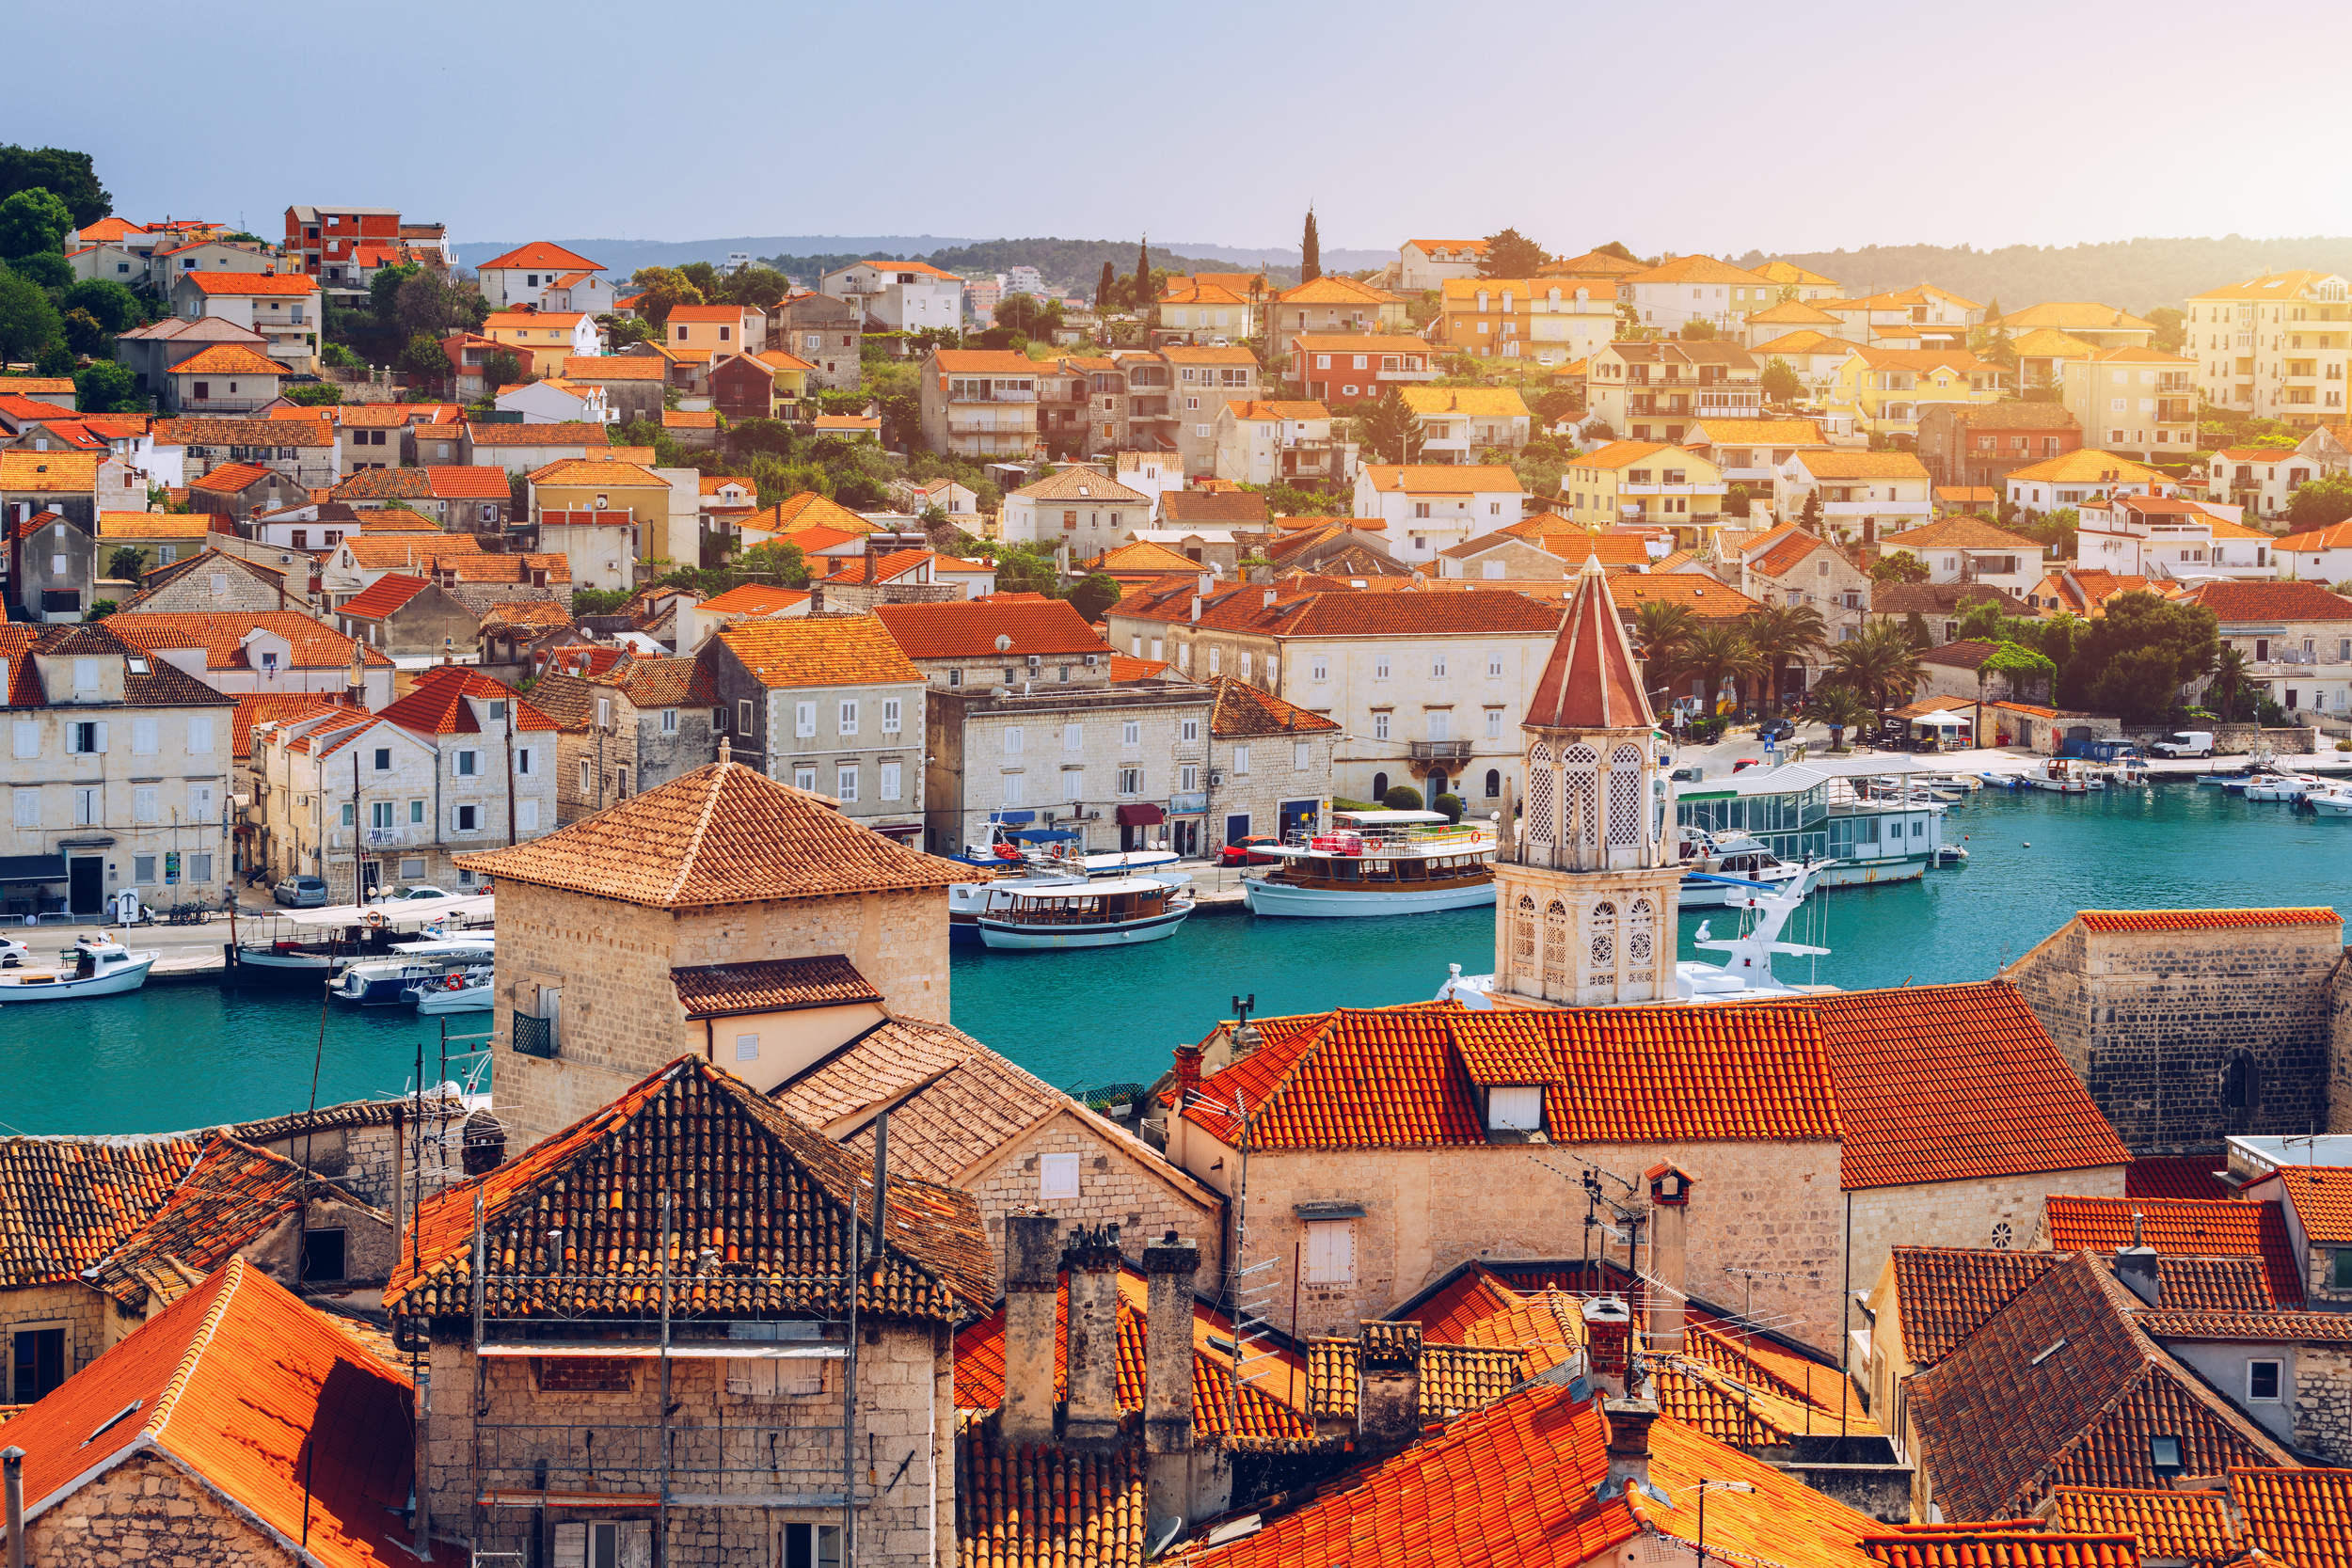 <p>For the perfect day trip from Split, book one of the many boat tours or ferries that stop in Trogir. Home to an exceptionally preserved Old Town that is UNESCO designated, there’s no shortage of picture-perfect scenes. There are also quite a few good cafes for such a small place.</p><p>You may also like: <a href='https://www.yardbarker.com/lifestyle/articles/25_non_salad_recipes_to_help_you_eat_your_fruits_vegetables_012424/s1__23987146'>25 non-salad recipes to help you eat your fruits & vegetables</a></p>